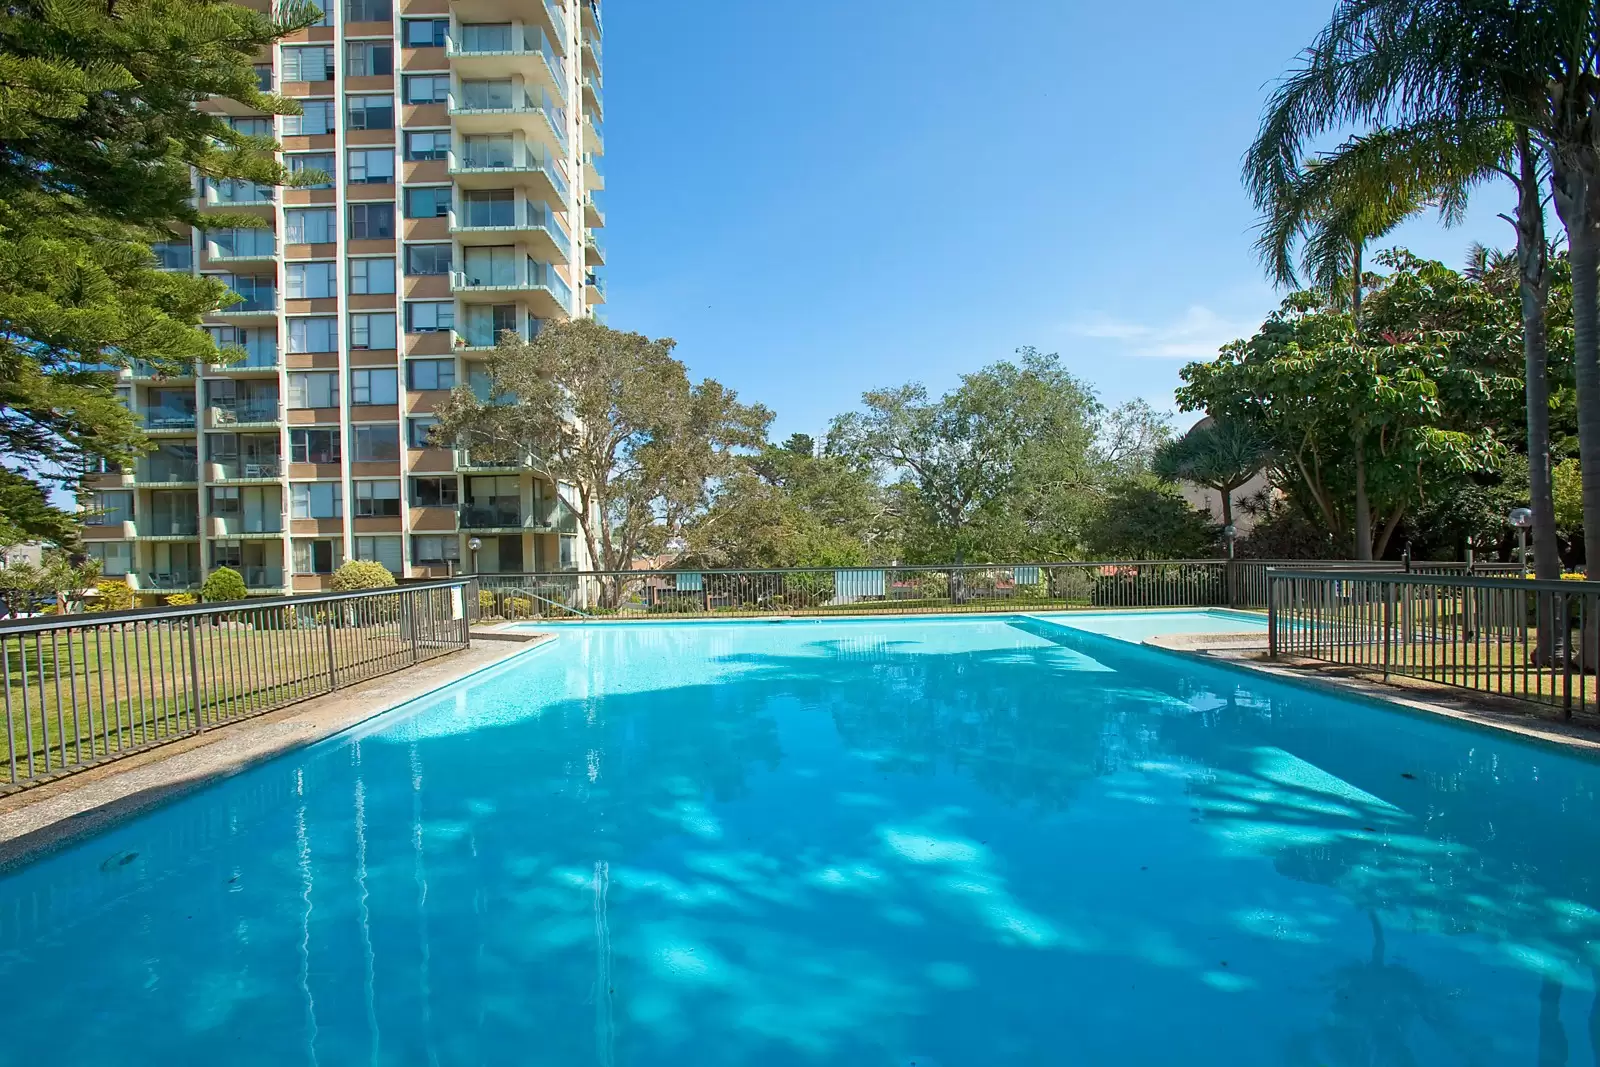 Photo #10: 10D/3 Darling Point Road, Darling Point - Sold by Sydney Sotheby's International Realty